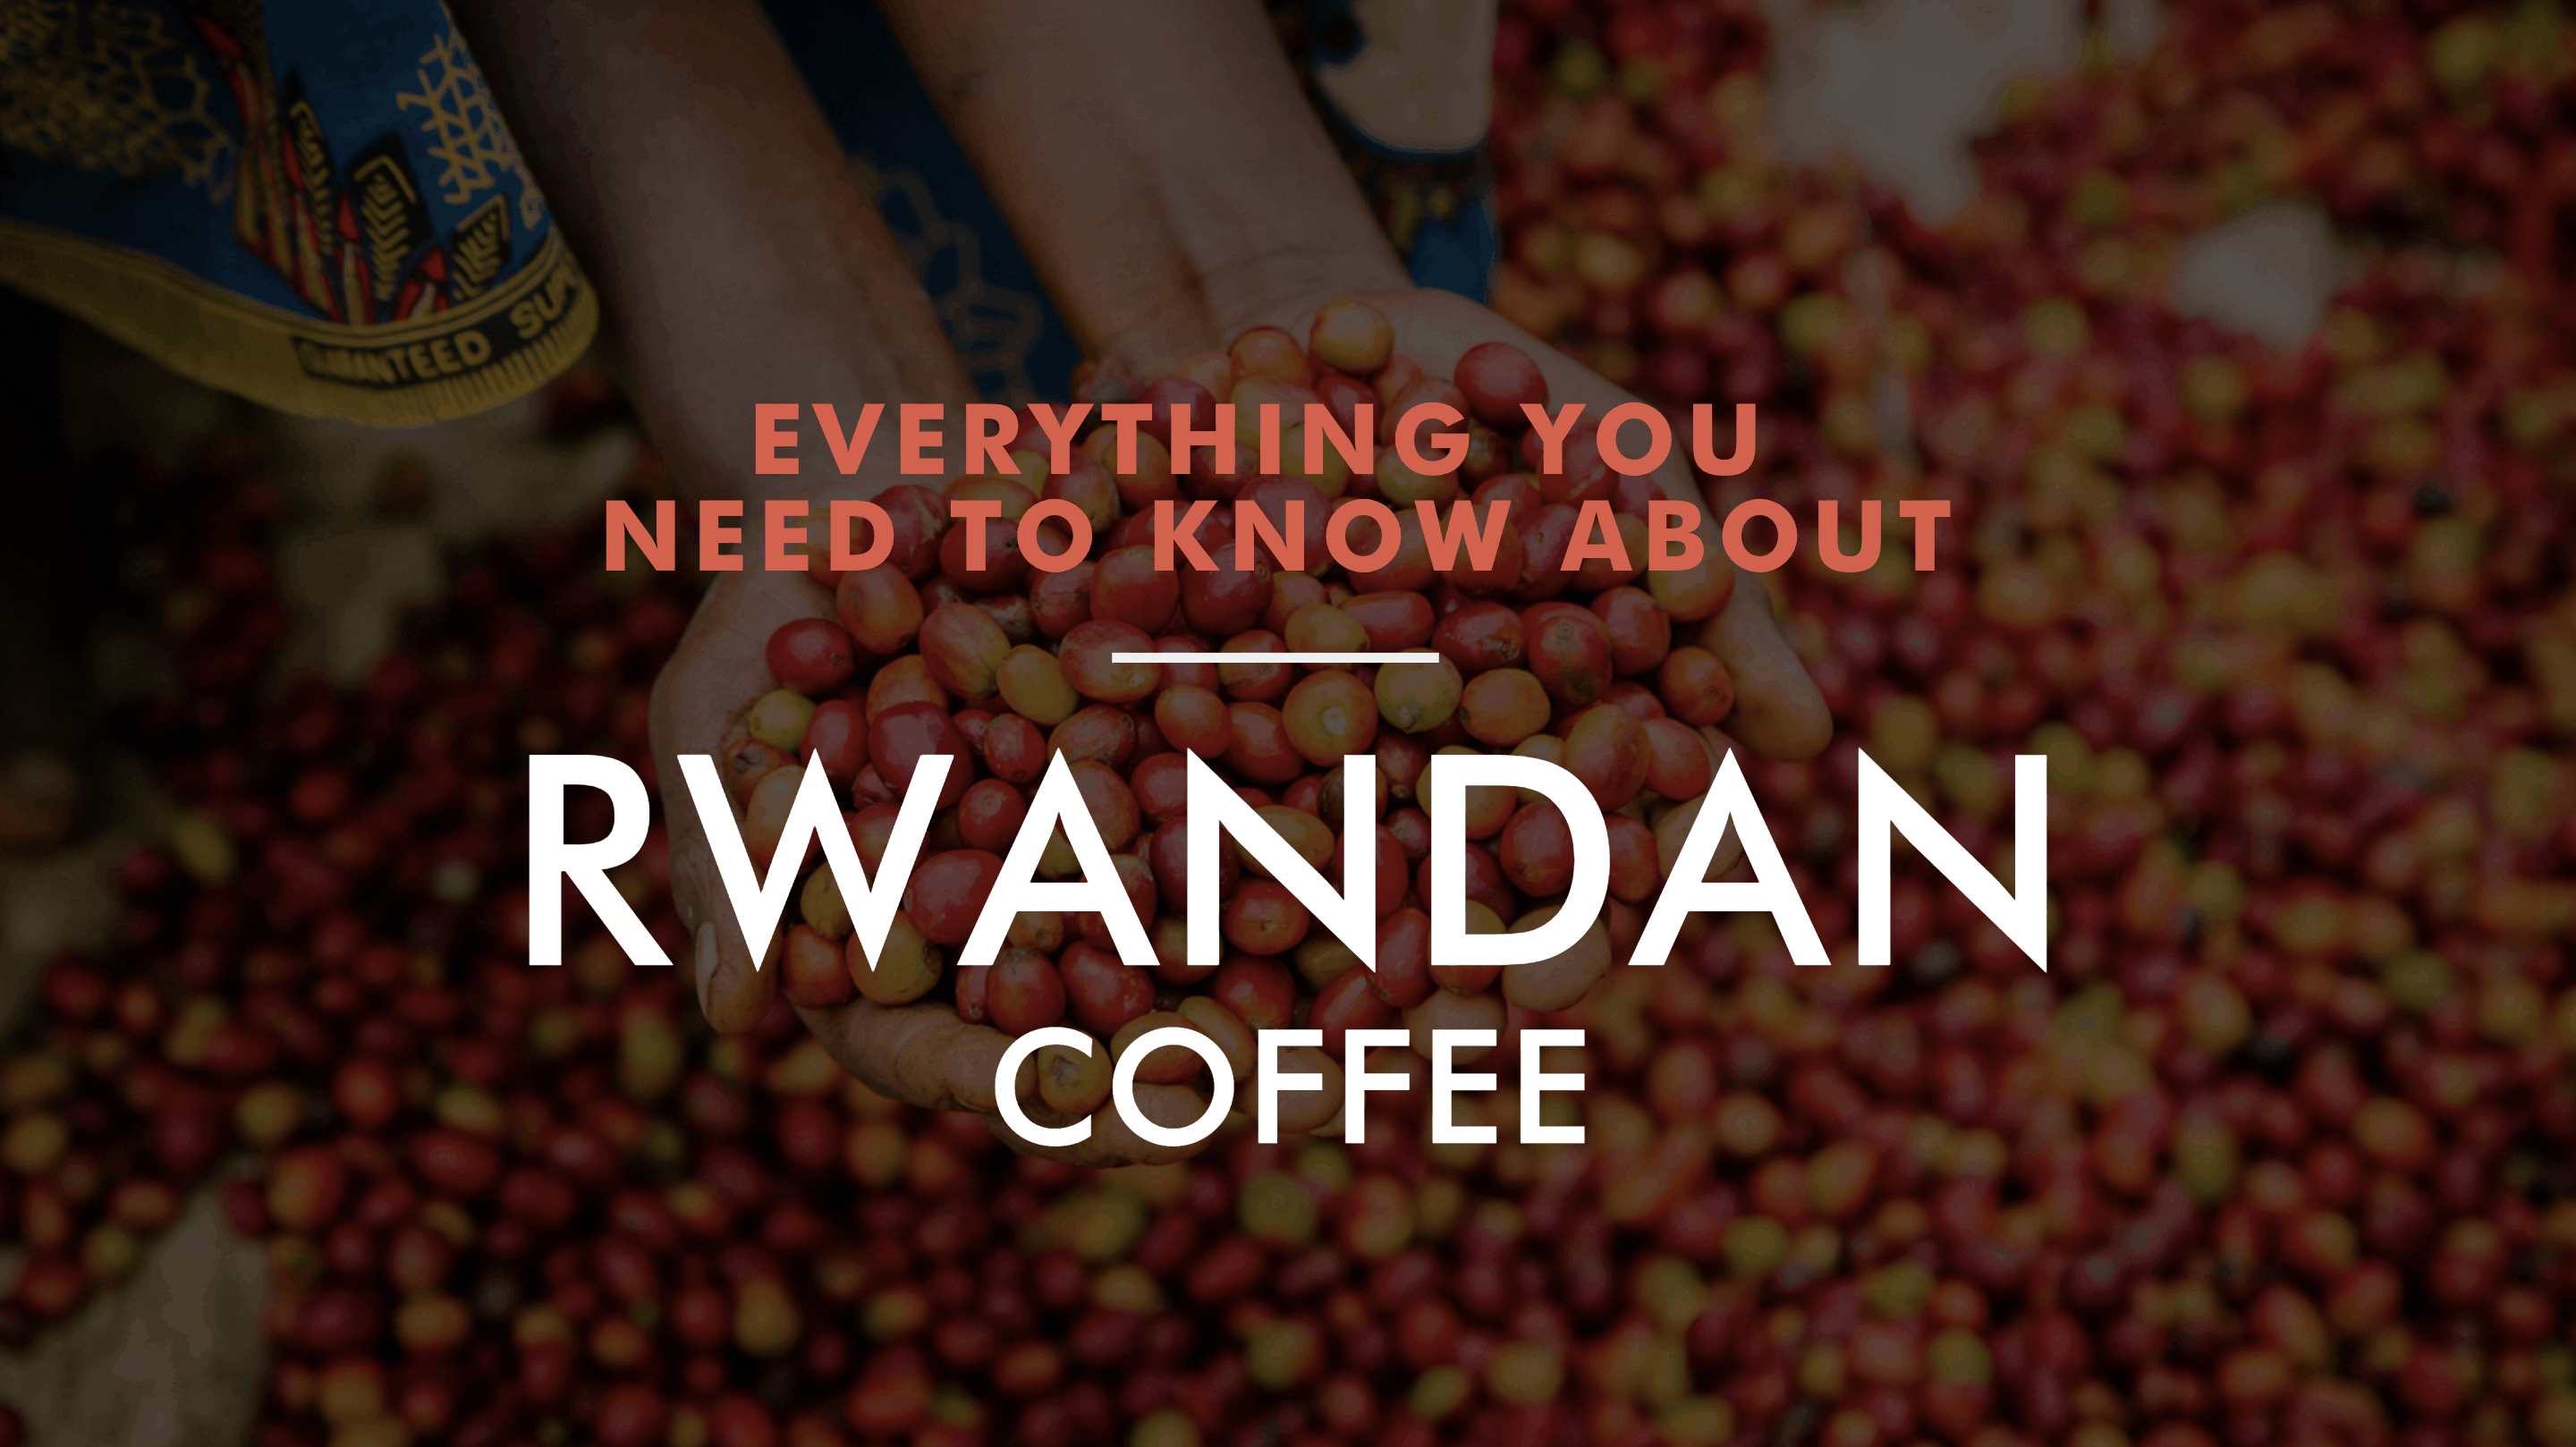 Everything You Need to Know About Rwandan Coffee